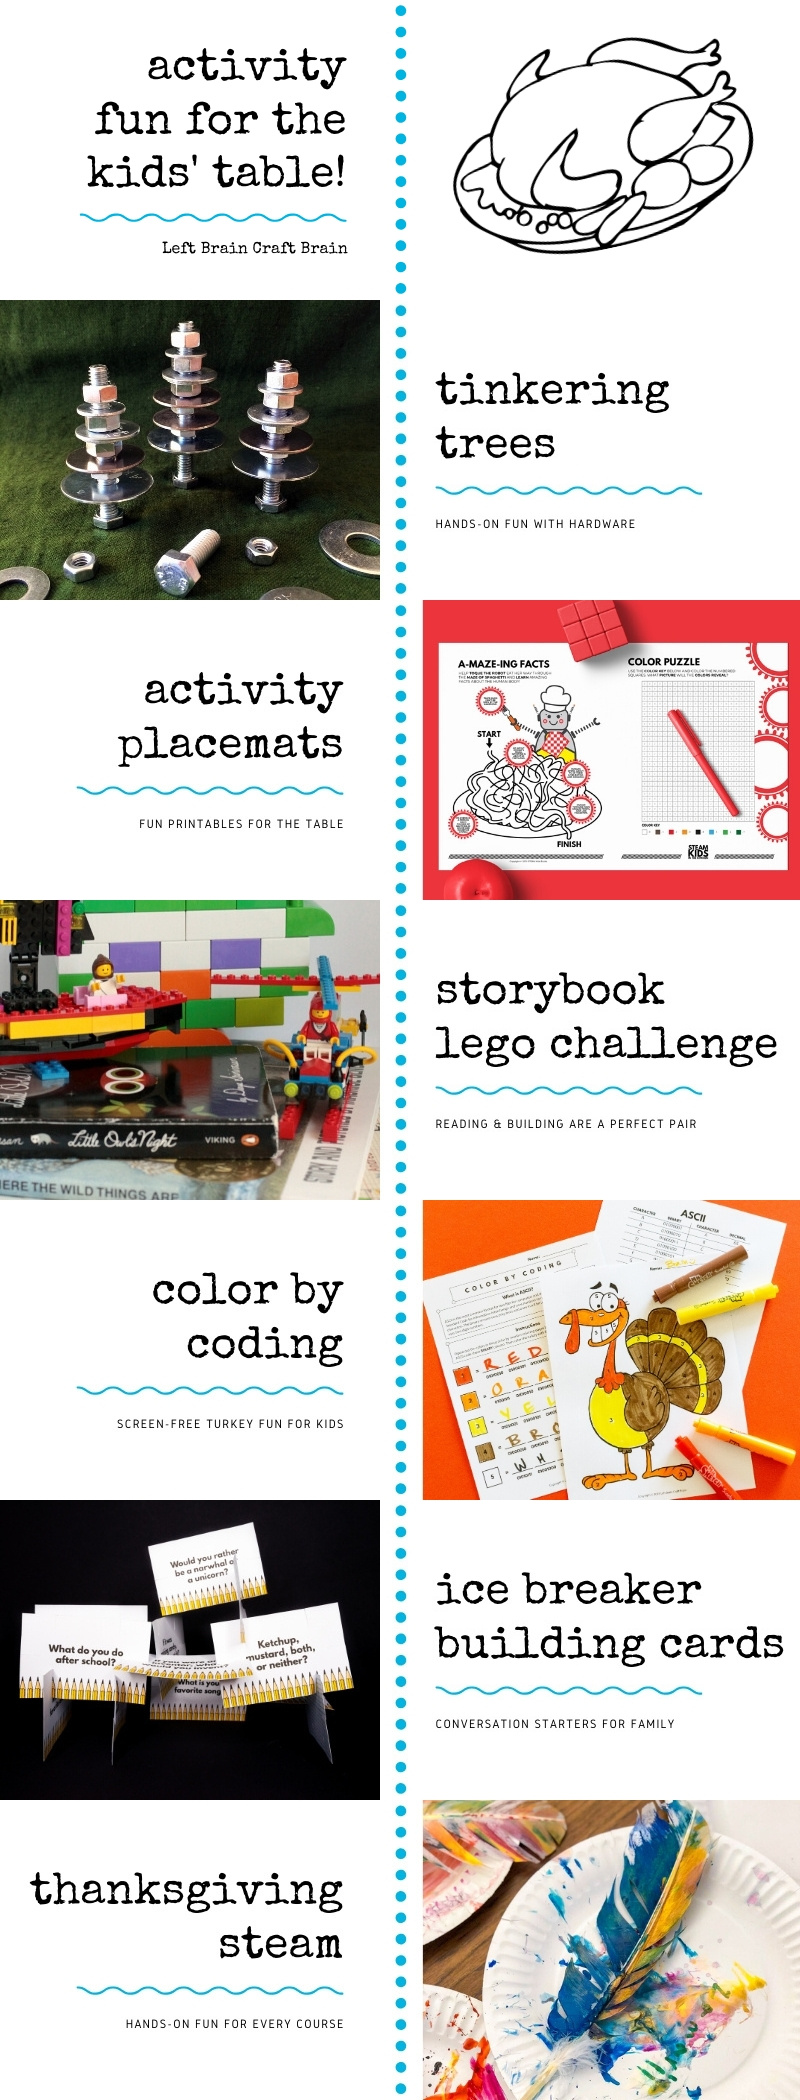 Looking for some fun stuff to do at the kids' table for the holidays? Add some STEAM (science, technology, engineering, art, and math) and make it more interesting! These easy hands-on activities and fun printables will add something unique for the kids this year.